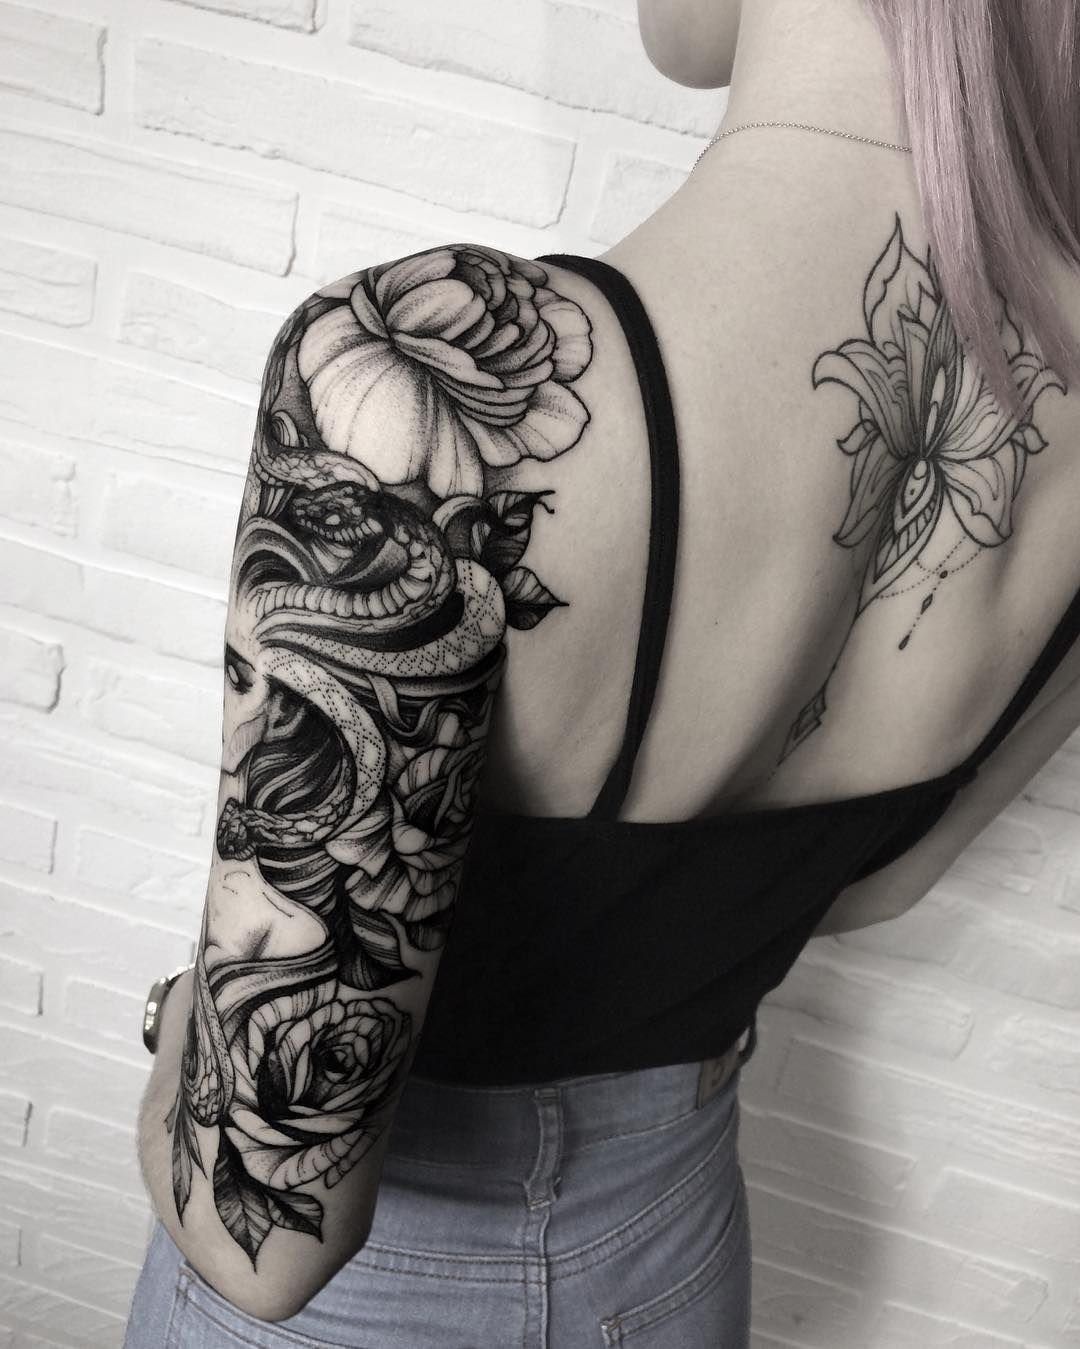 10 Unique Tattoo Sleeve Ideas For Women intended for dimensions 1080 X 1349